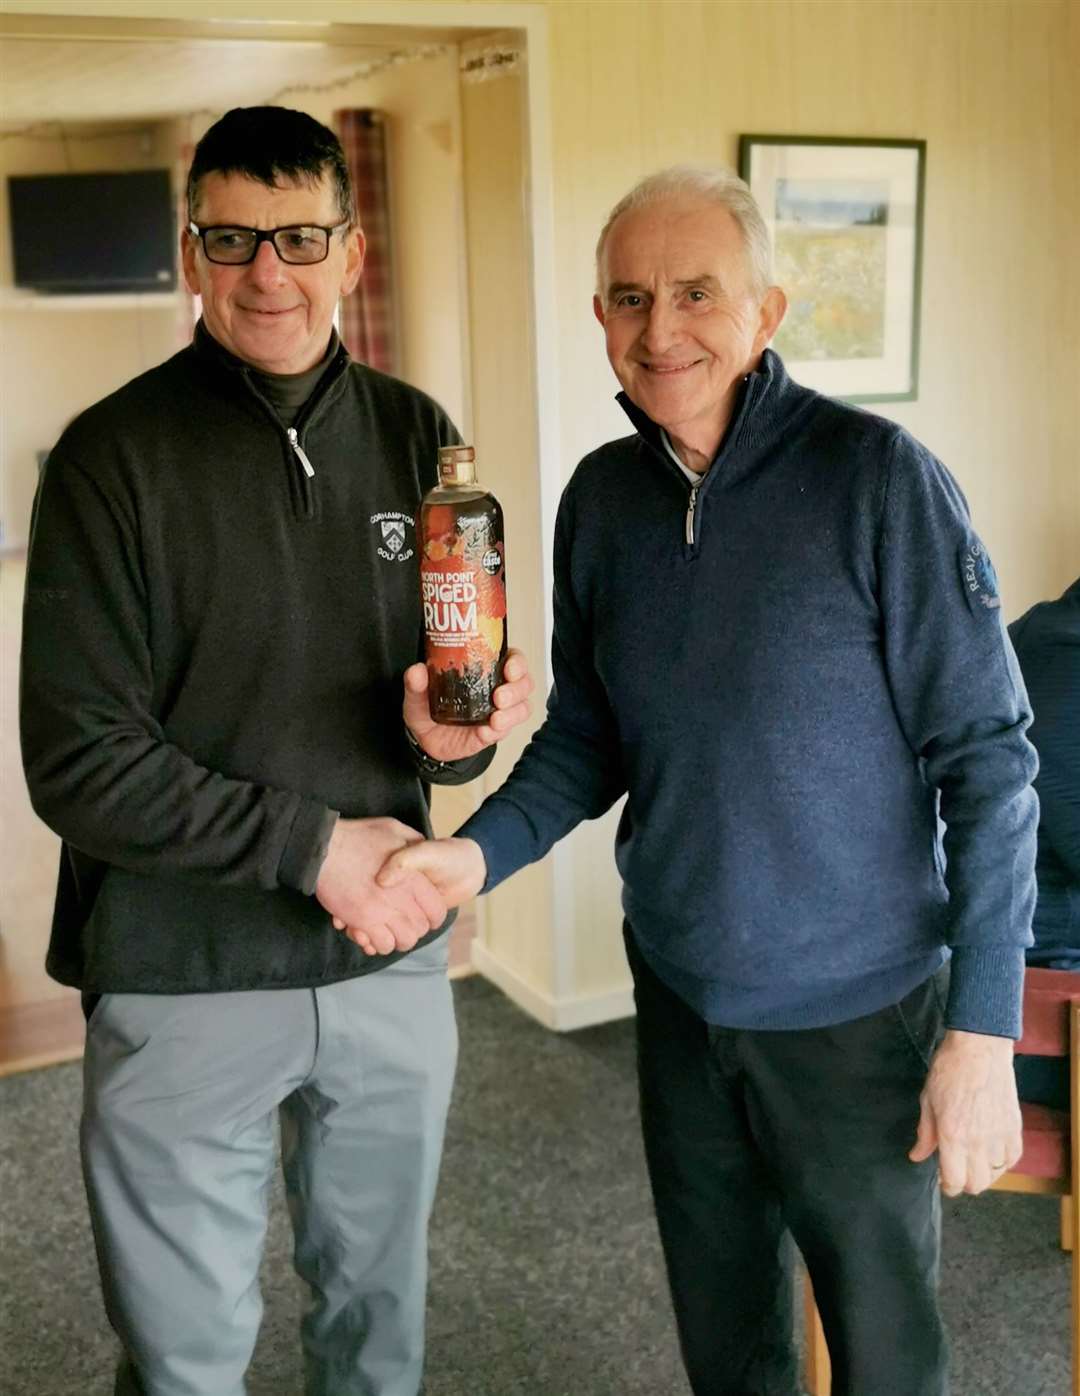 Malcolm Thomson (left) receiving a bottle of North Point Distillery Spiced Rum from Fred Groves after he won the nearest-the-pin prize in last Thursday's Senior Stableford competition at Reay.